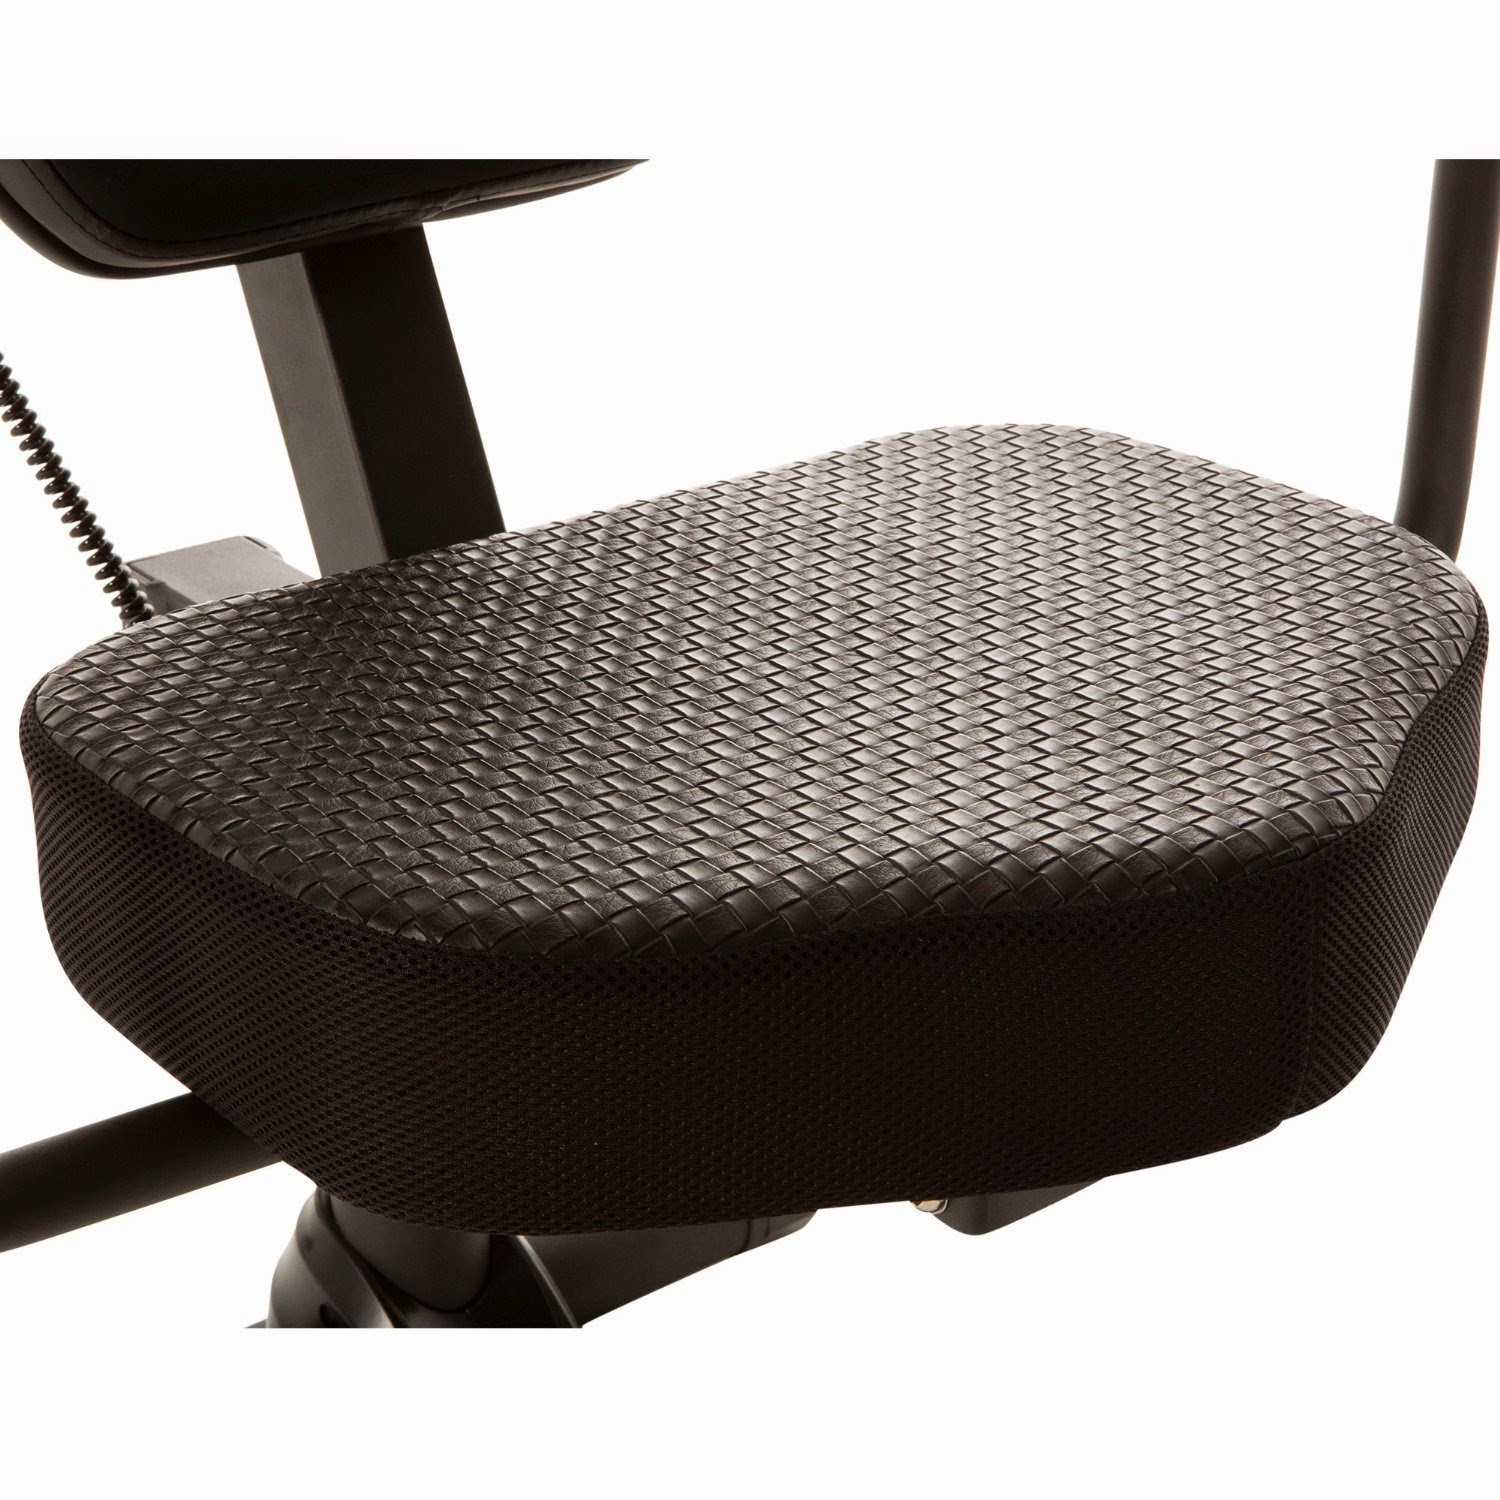 Exerpeutic 2000 Air Soft Seat, wider & thicker padding, aerodynamically designed to disperse user's weight & absorb shock, plus increased air flow